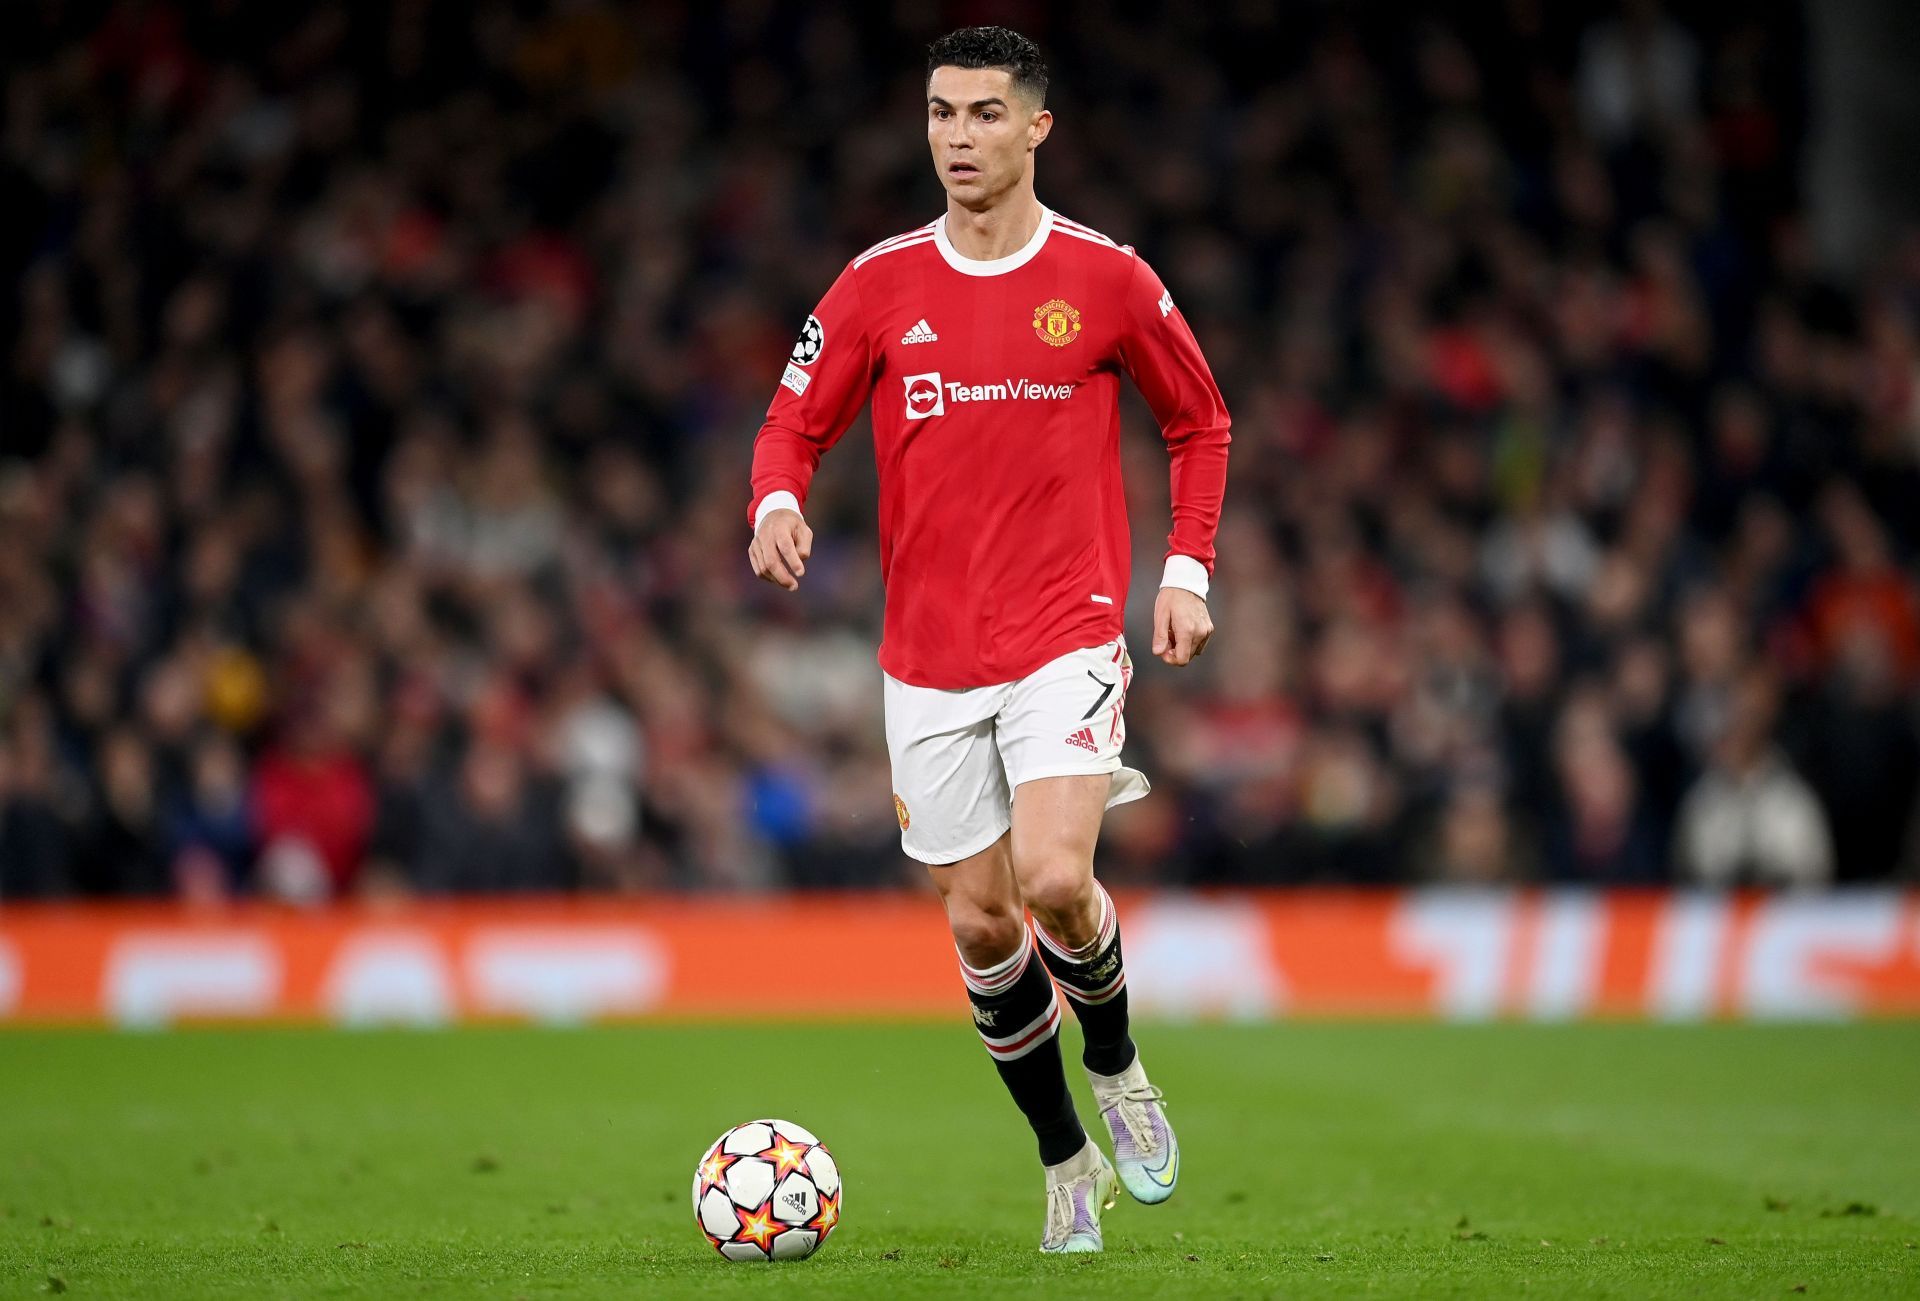 It may not be feasible for Cristiano Ronaldo to leave Old Trafford at this point in his career